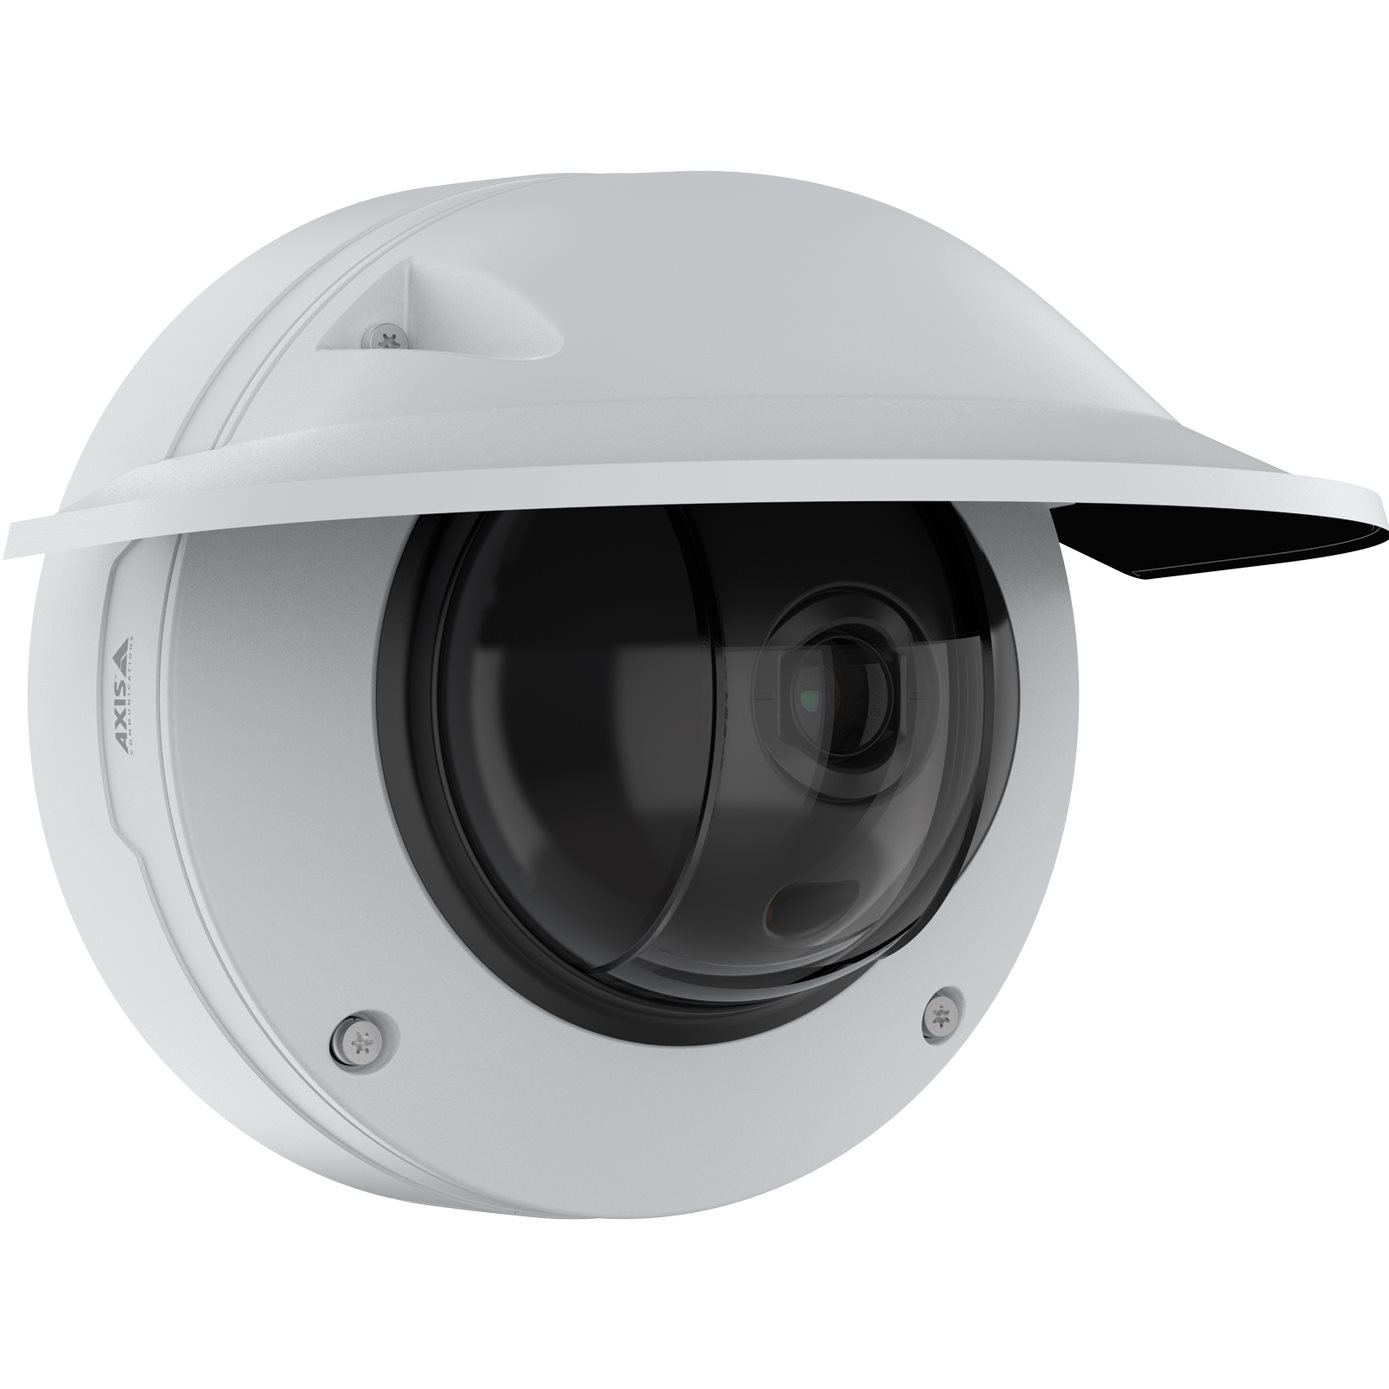 Camra Axis Q3536-LVE 29MM DOME CAMERA 02224-001